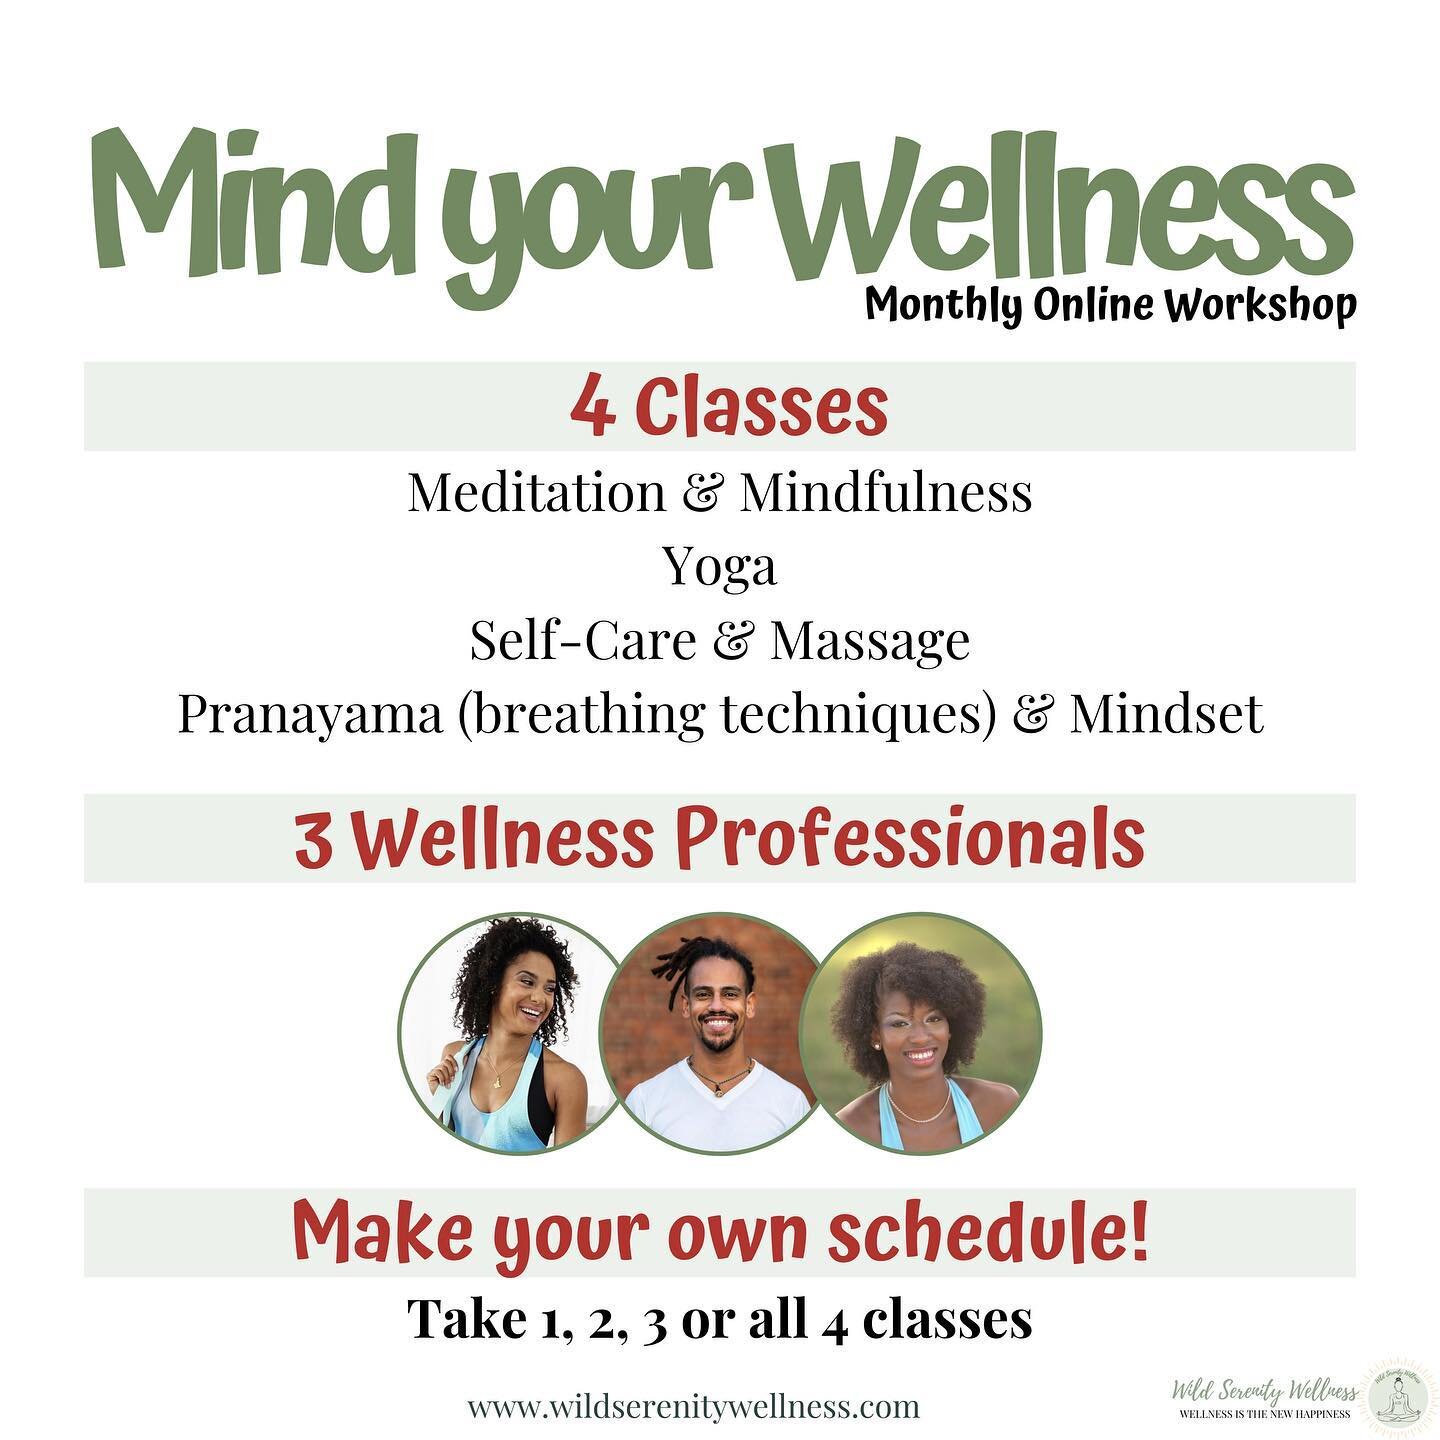 You asked for it and we listened!!!
Now you can make up your own workshop schedule! Take 1, 2, 3 or all 4 classes... See you on May 15th.

&gt;&gt;&gt; Link in bio for tickets &lt;&lt;&lt;
&bull;
&bull;
&bull;
#mindyourwellness
#wellnessworkshop 
#we